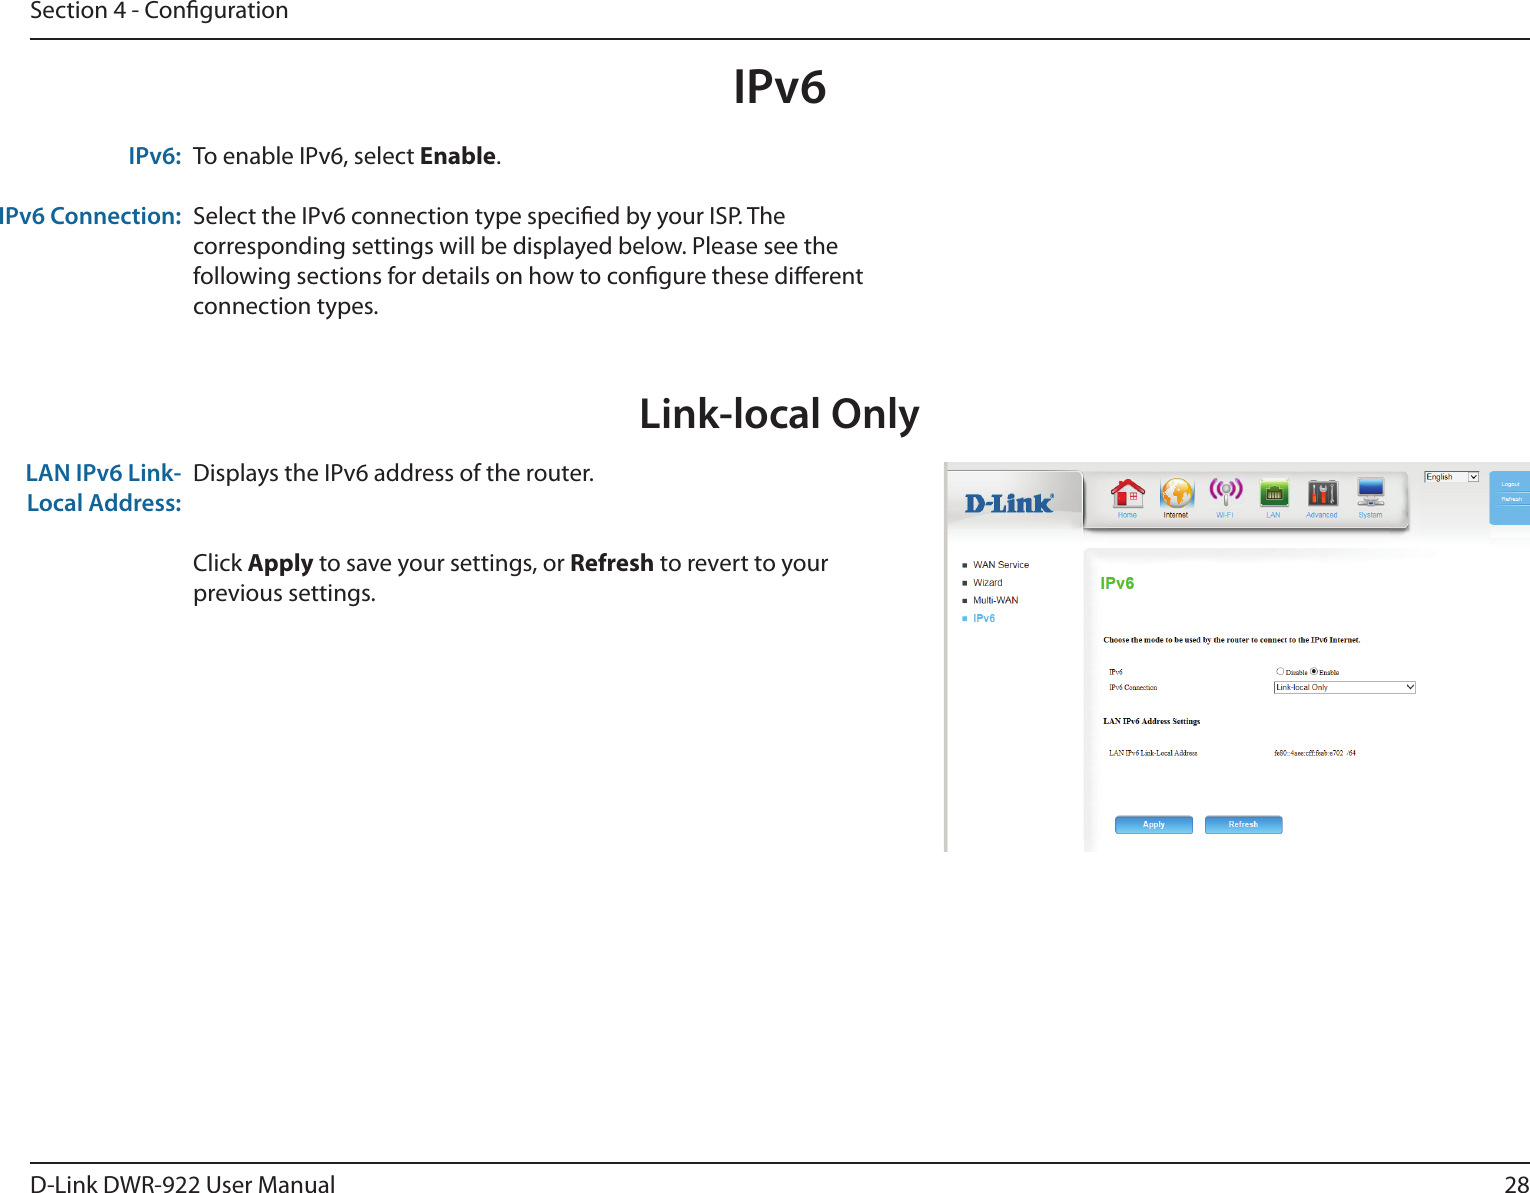 28D-Link DWR-922 User ManualSection 4 - CongurationIPv6Link-local OnlyDisplays the IPv6 address of the router.Click Apply to save your settings, or Refresh to revert to your previous settings.LAN IPv6 Link-Local Address:To enable IPv6, select Enable.Select the IPv6 connection type specied by your ISP. The corresponding settings will be displayed below. Please see the following sections for details on how to congure these dierent connection types.IPv6:IPv6 Connection: